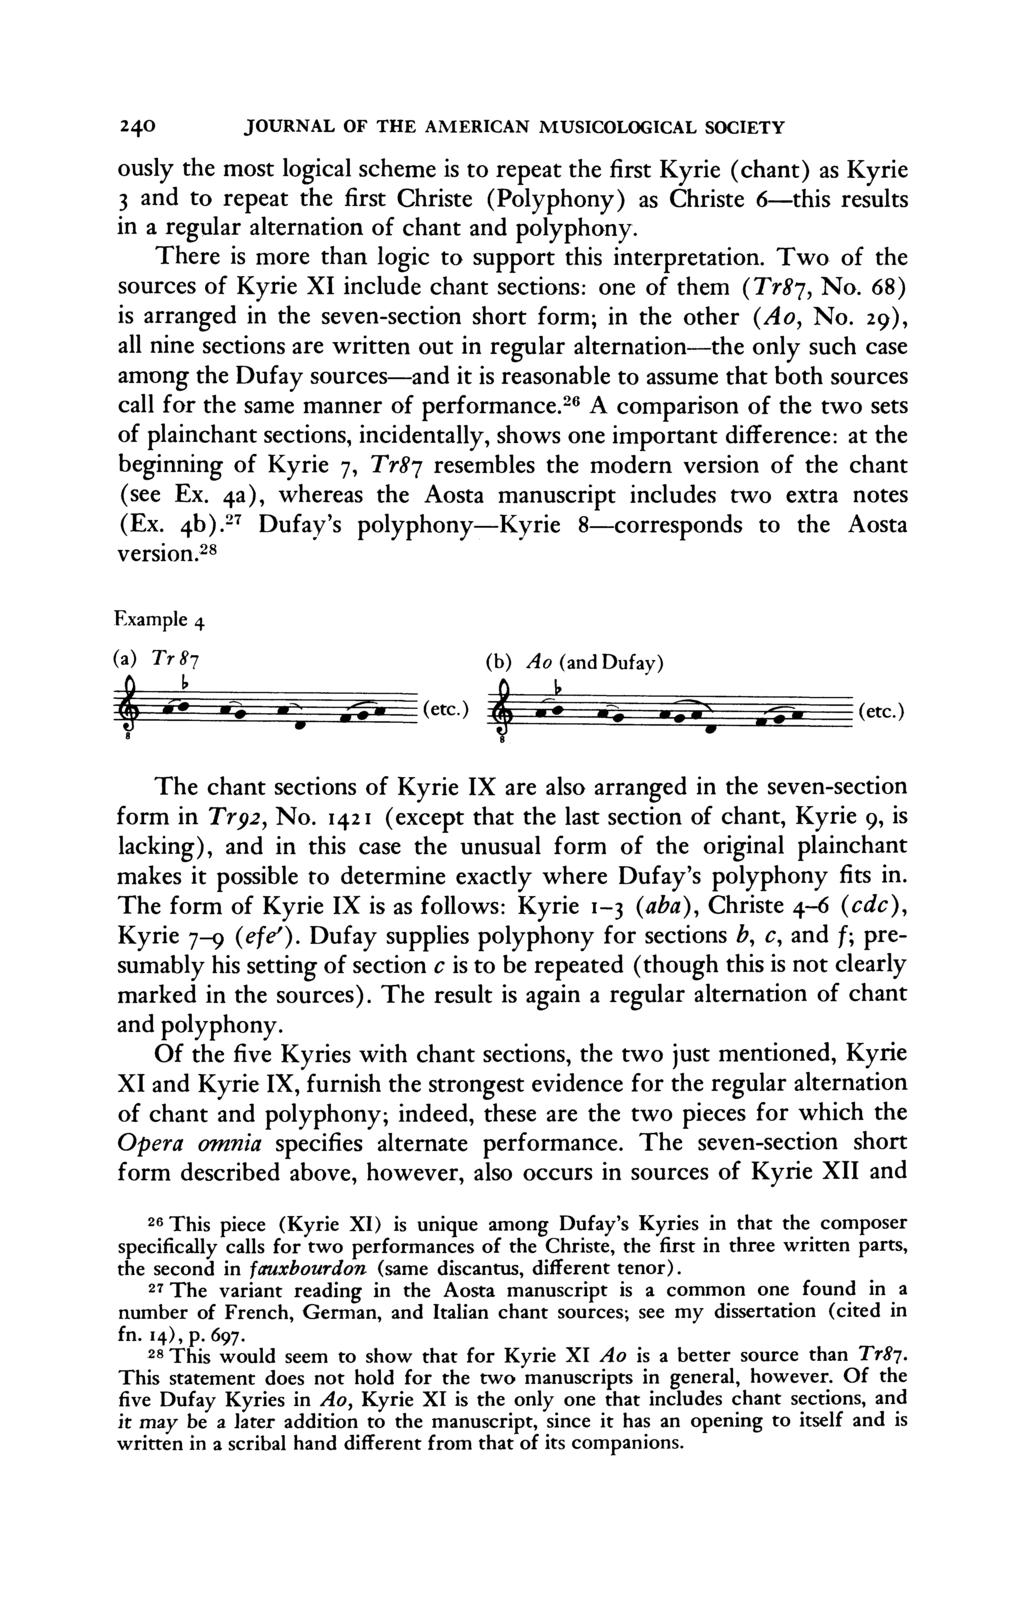 240 JOURNAL OF THE AMERICAN MUSICOLOGICAL SOCIETY ously the most logical scheme is to repeat the first Kyrie (chant) as Kyrie 3 and to repeat the first Christe (Polyphony) as Christe 6-this results